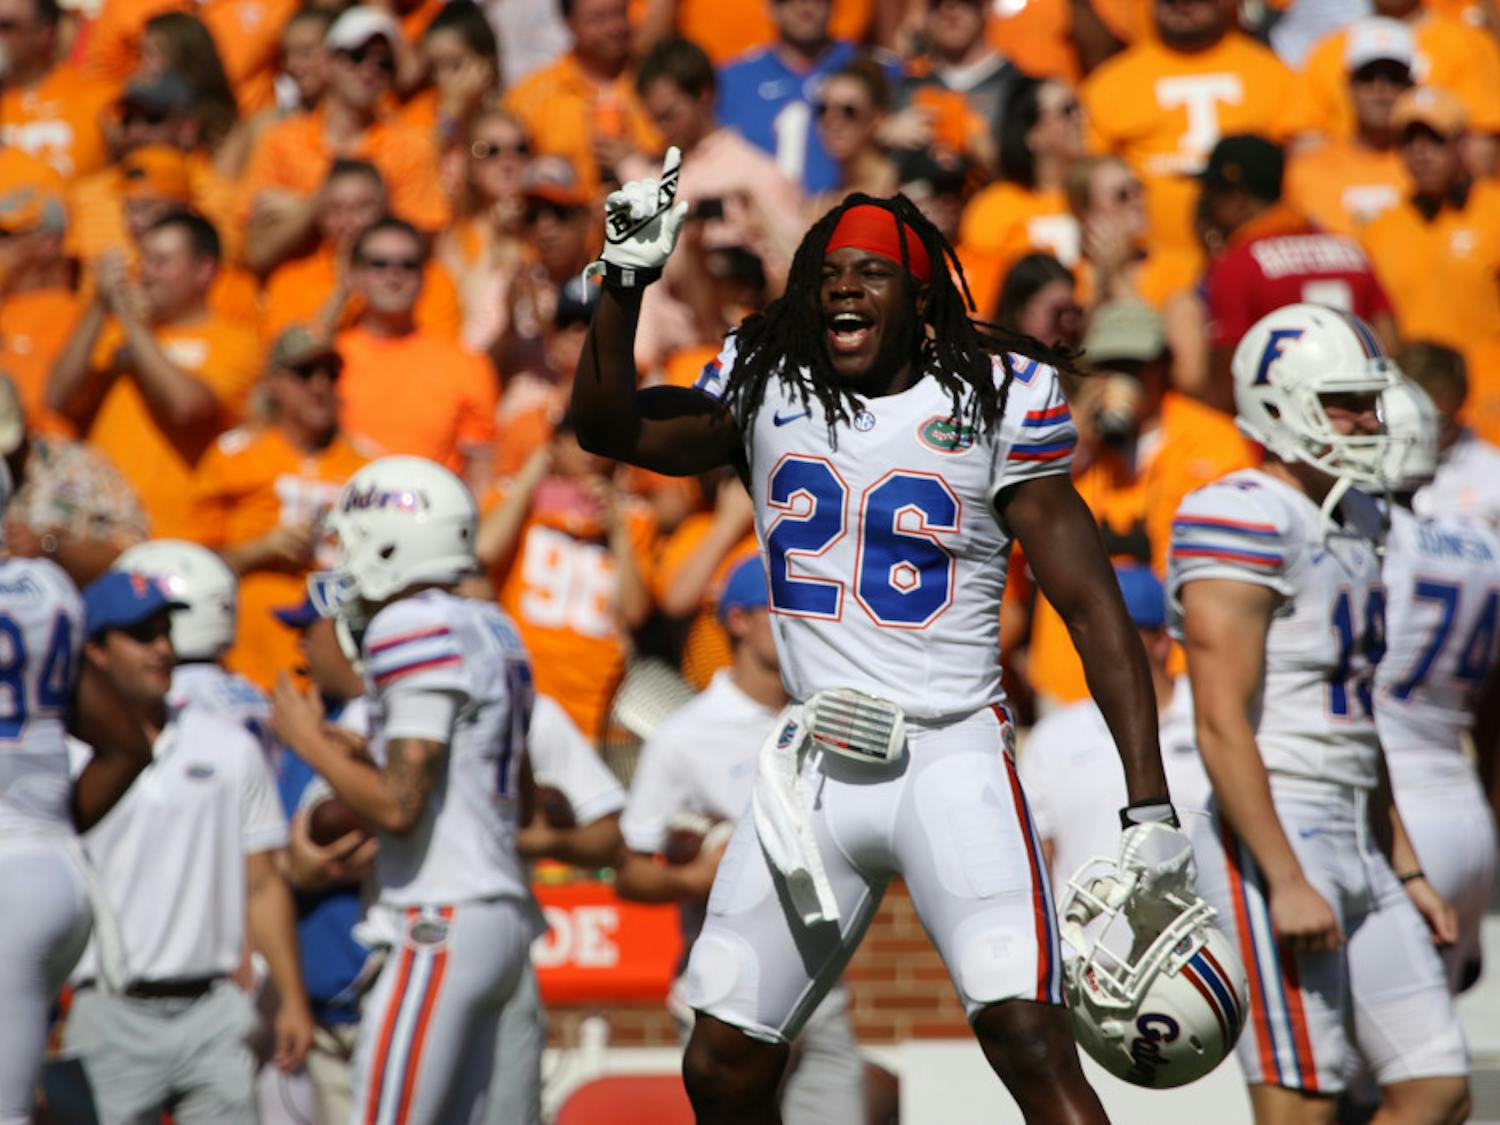 Marcell Harris celebrates during Florida's 38-28 loss against Tennessee on Sept. 24, 2016, at Neyland Stadium.